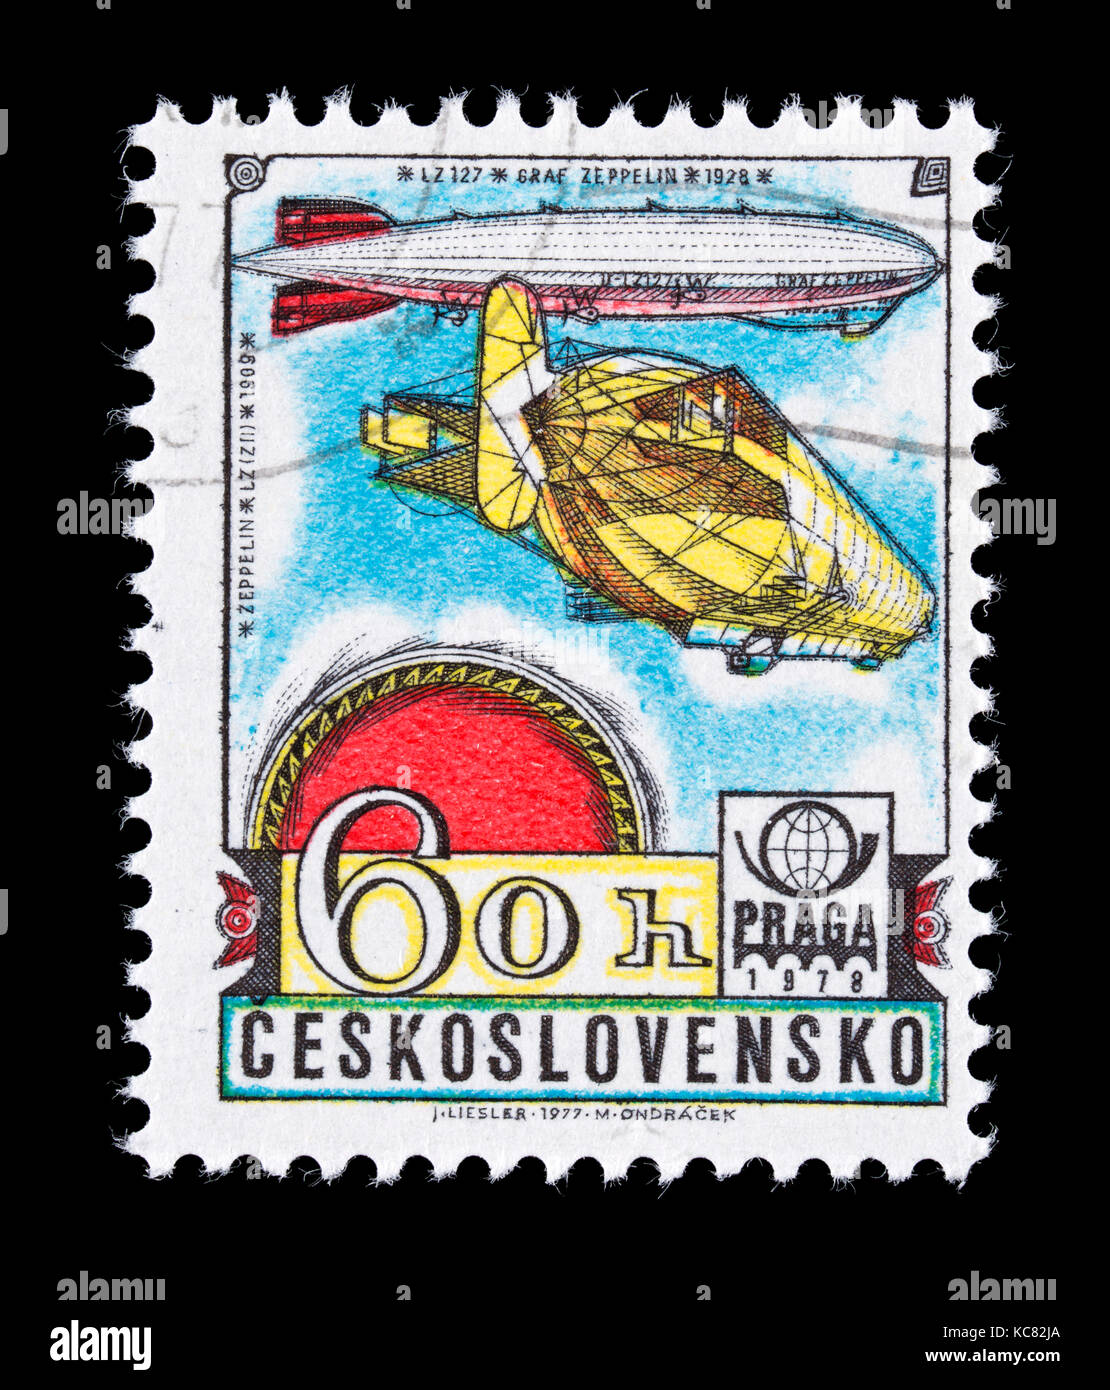 Postage stamp from Czechoslovakia depicting zeppelins from 1909 and 1928, issued for PRAGA '78. Stock Photo